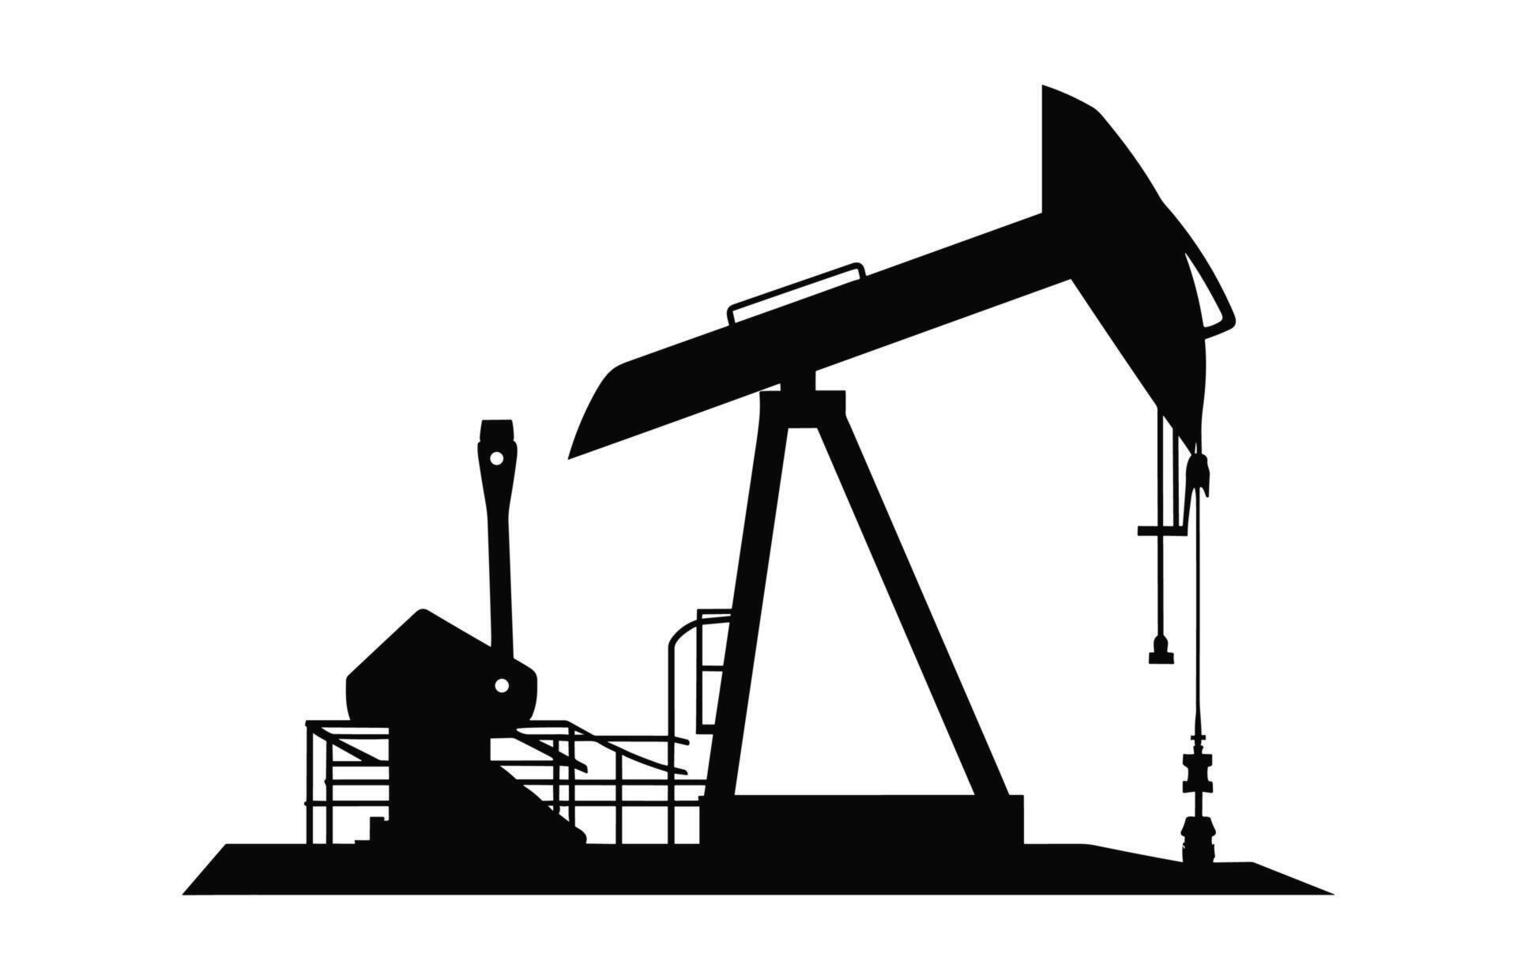 Oil pump jack Vector black silhouette isolated on a white background